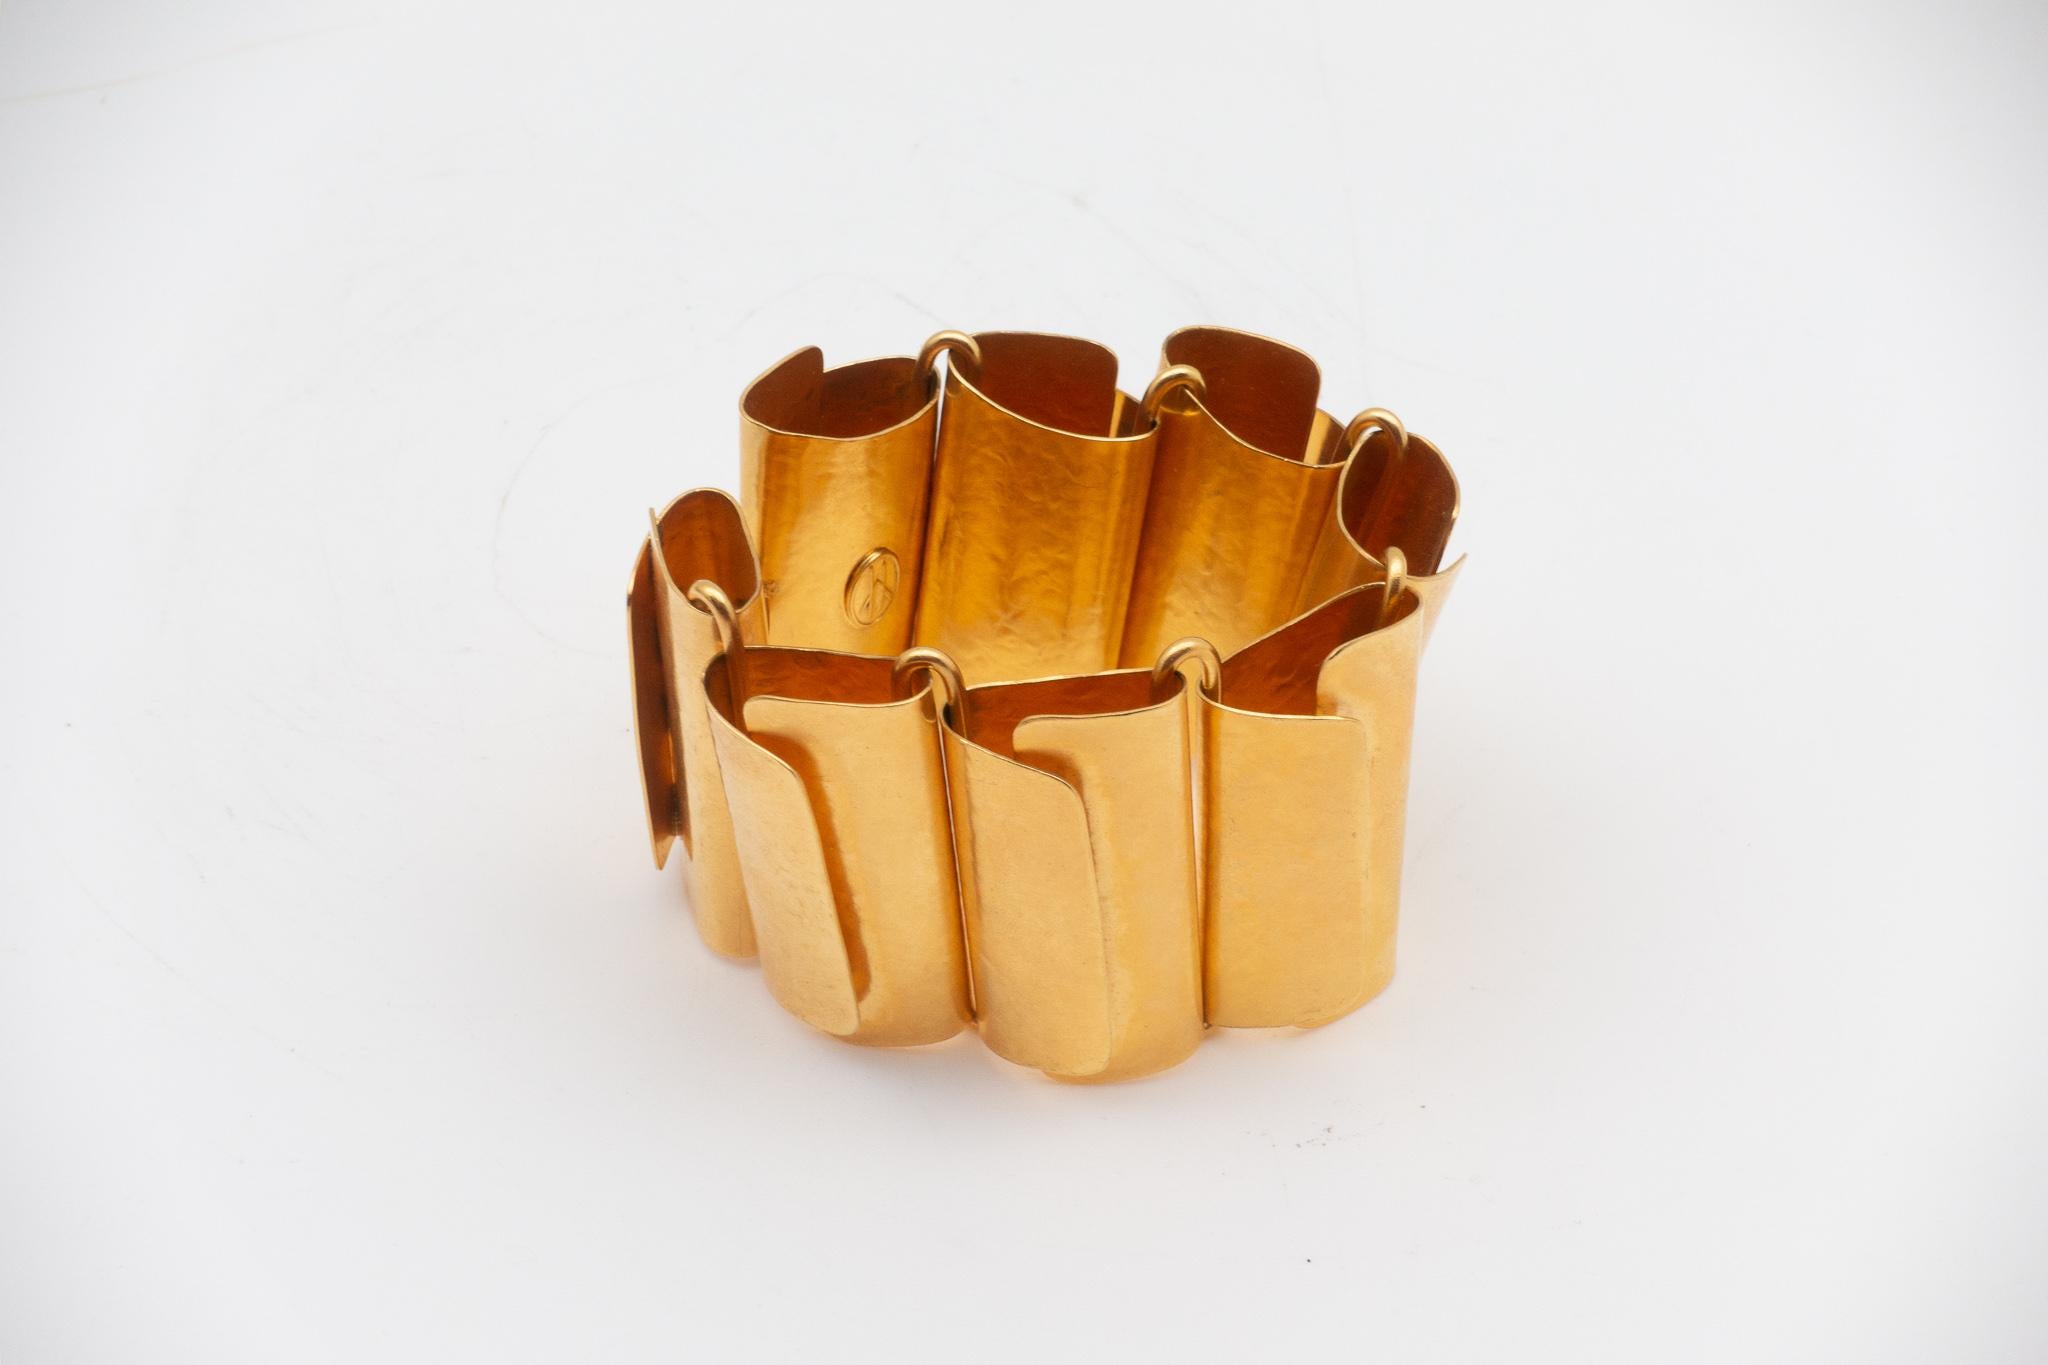 Highly collectable Hervé Van Der Straeten hammered gold-plated brass bracelet. Hervé Van Der Straeten has discontinued making jewelry to focus more on his furniture line. His pieces have been collected the world over for decades. This is truly one